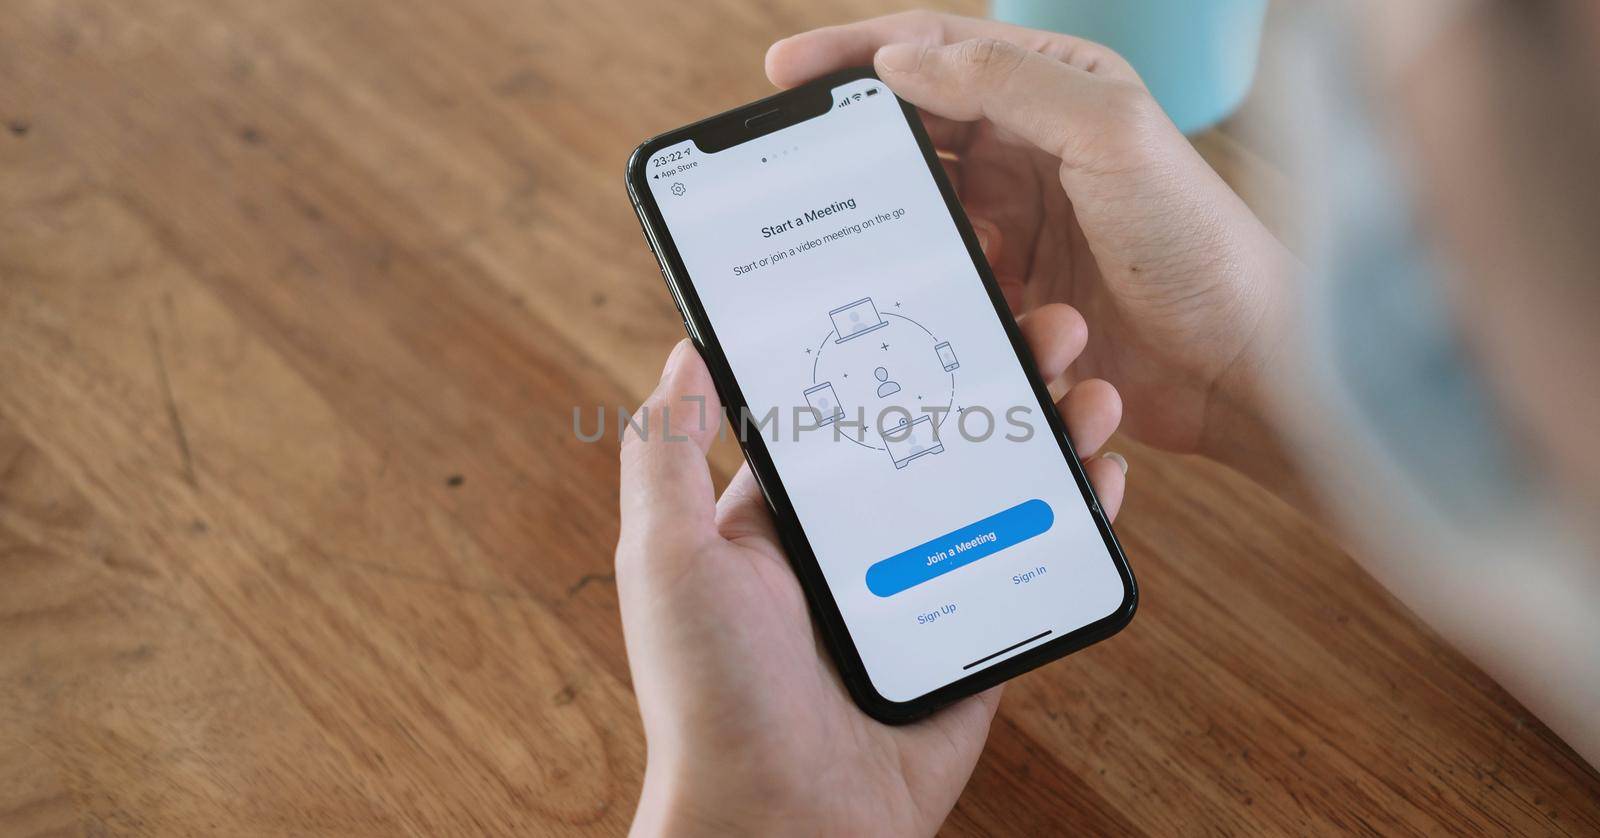 CHIANG MAI, THAILAND - JUN 14, 2020 : A working from home employee is downloading the Zoom application social platform, ready for internet meetings, remote workers or online education.